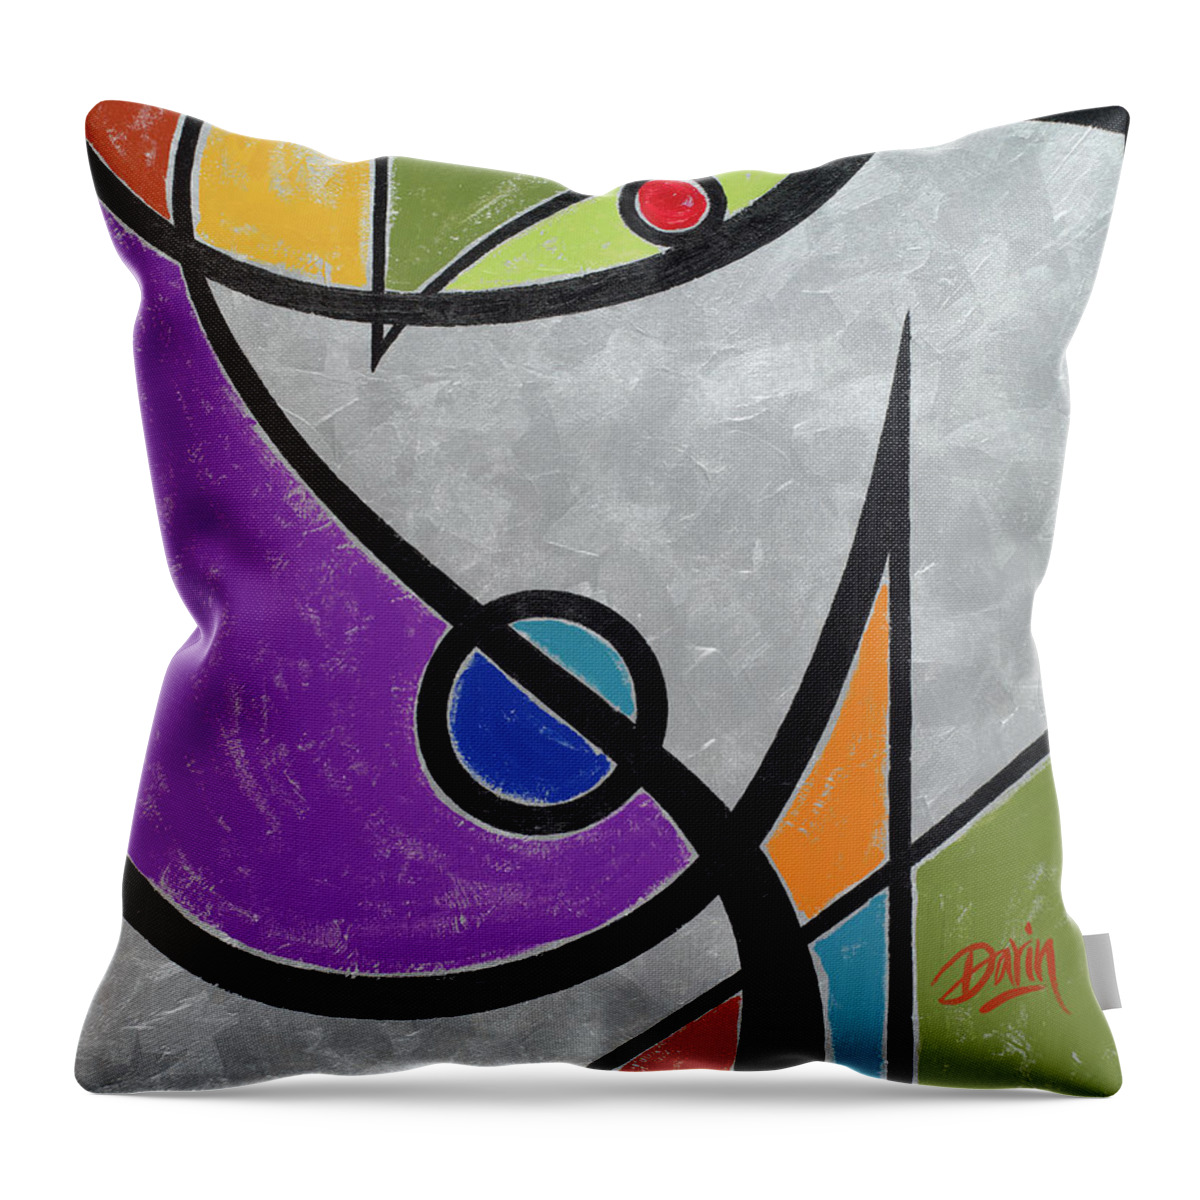 Abstract Throw Pillow featuring the painting Amuse by Darin Jones